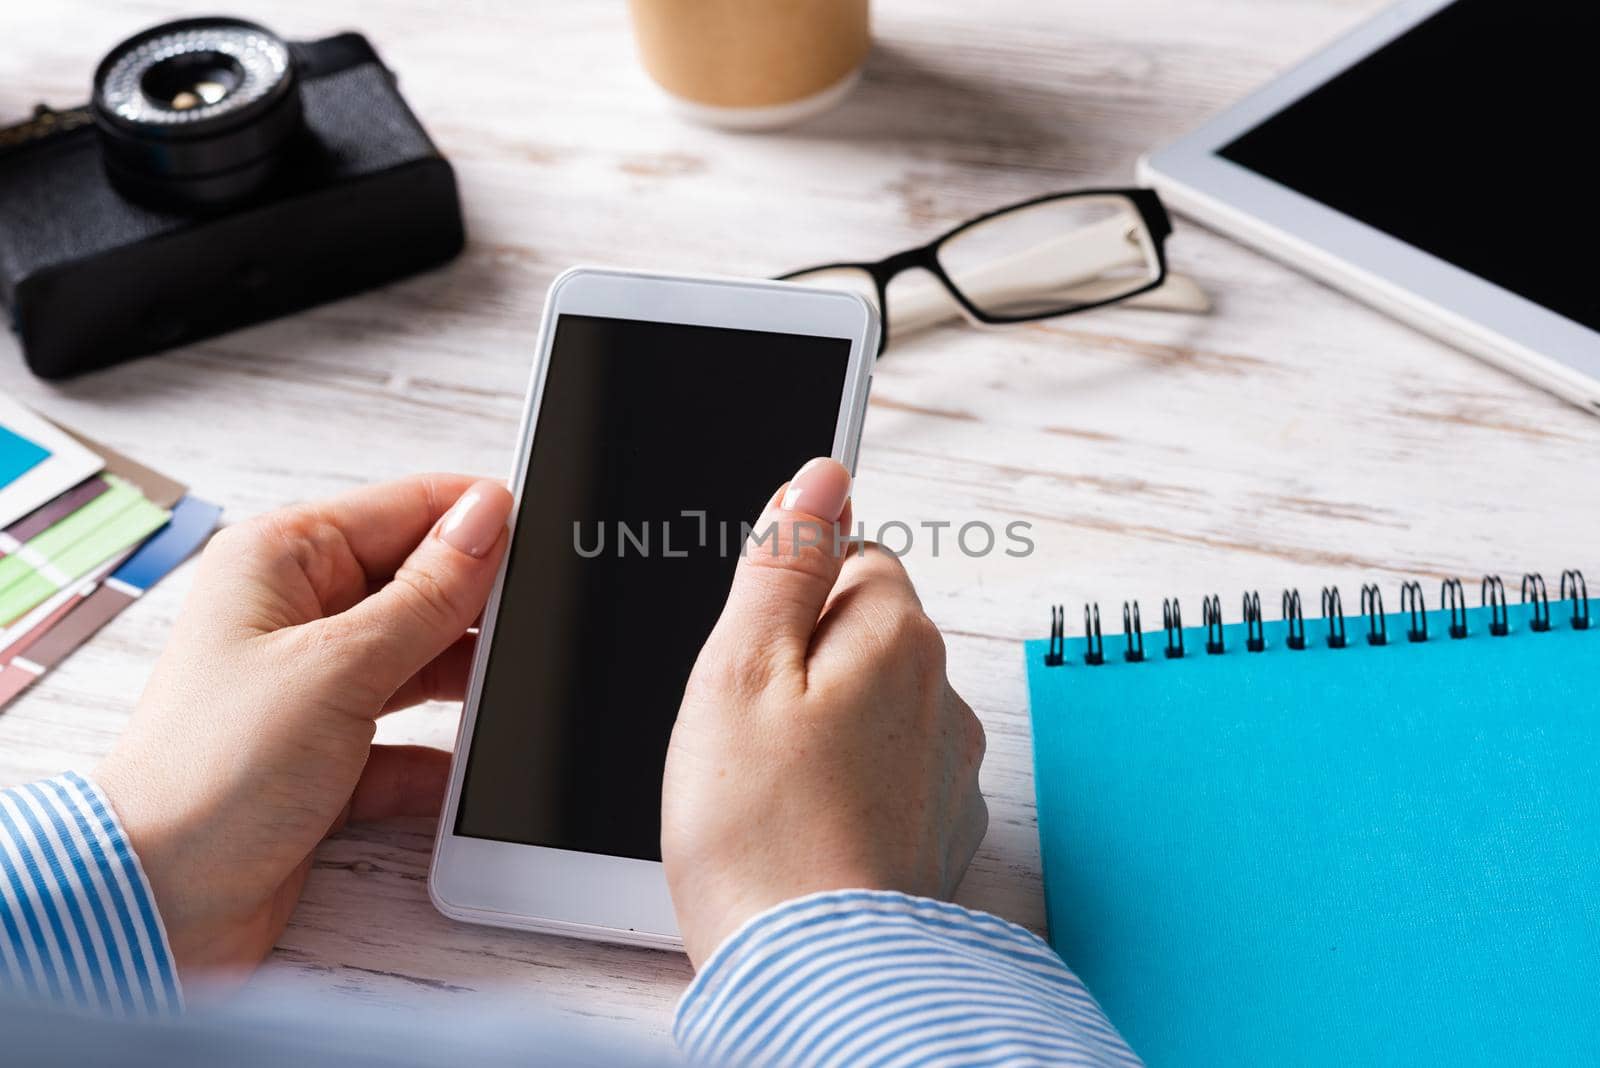 Blogger sitting at desk and holding smartphone. Mobile smart devices in business processes. Business occupation and innovation. Corporate office workplace with business woman at wooden desk.